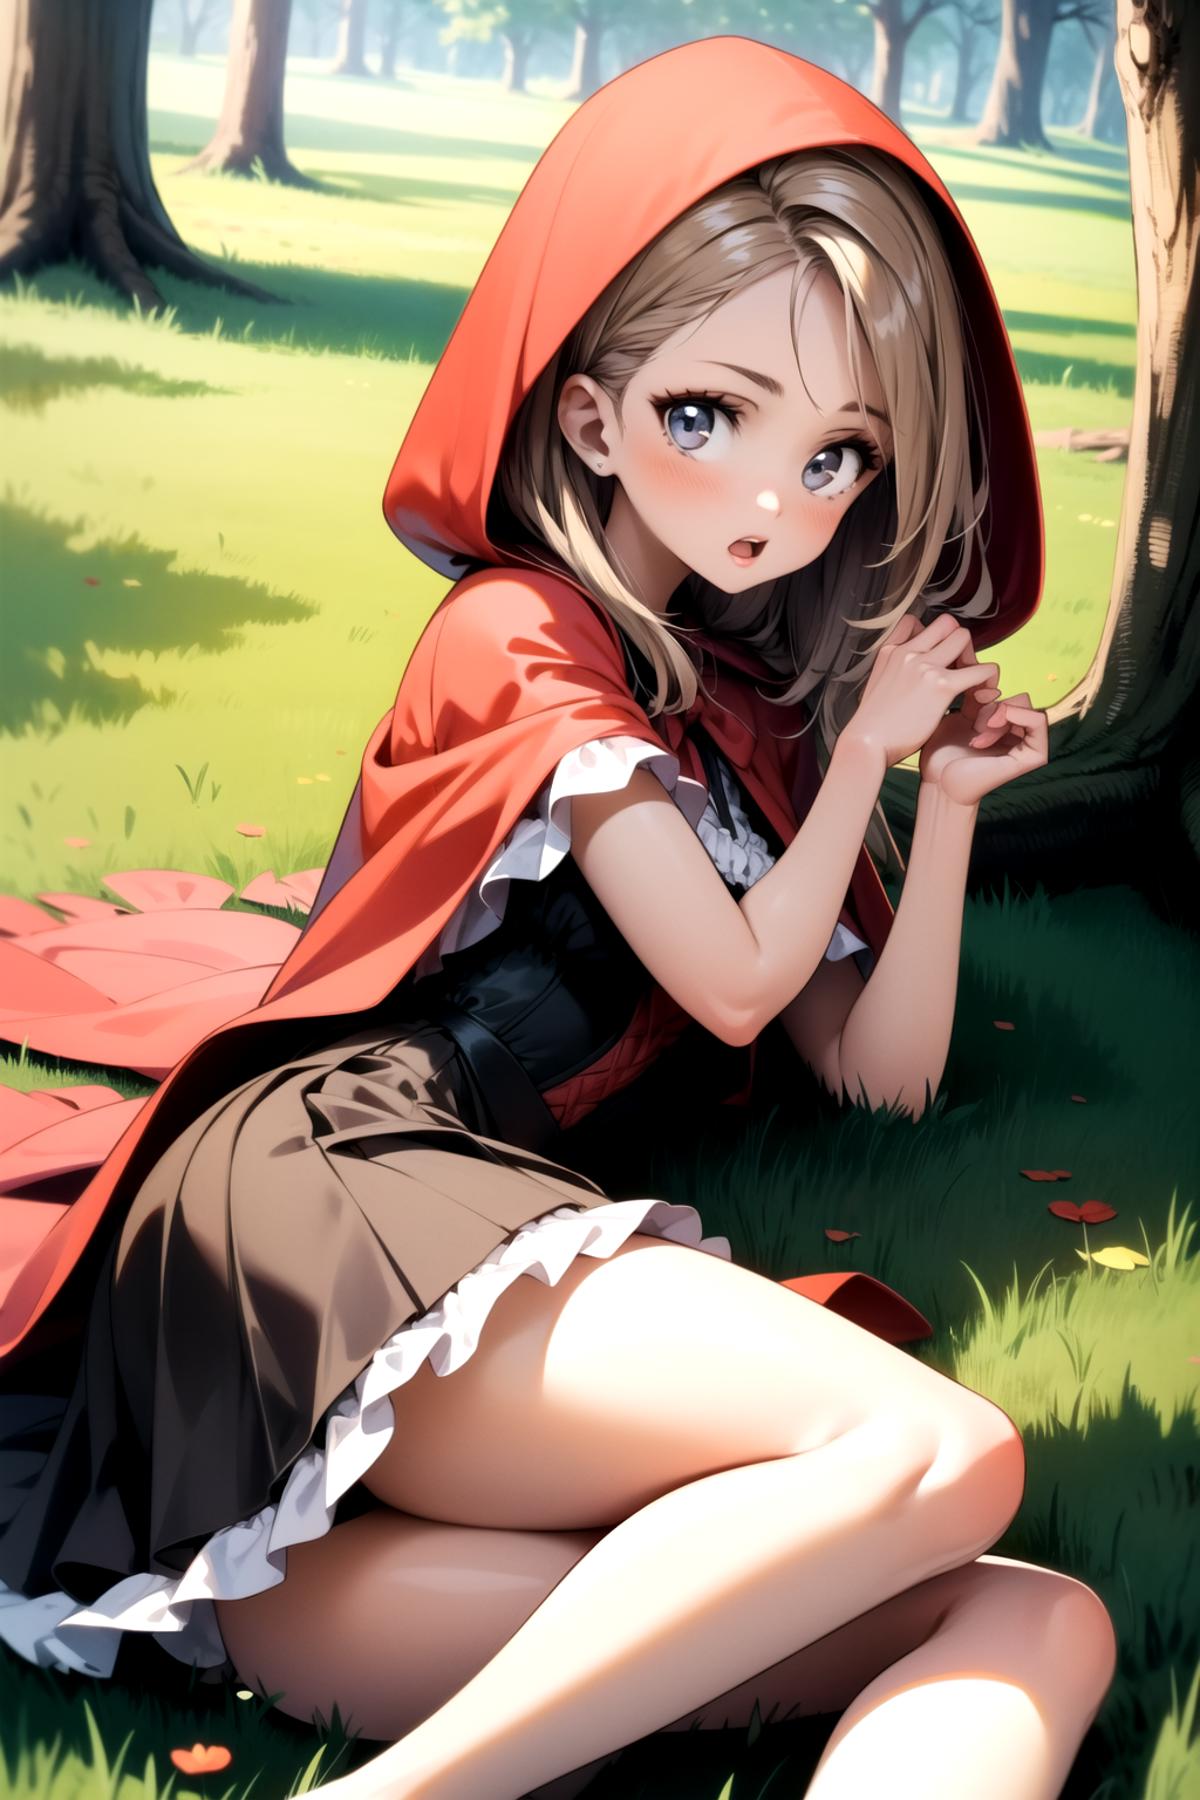 Little red riding hood image by psoft